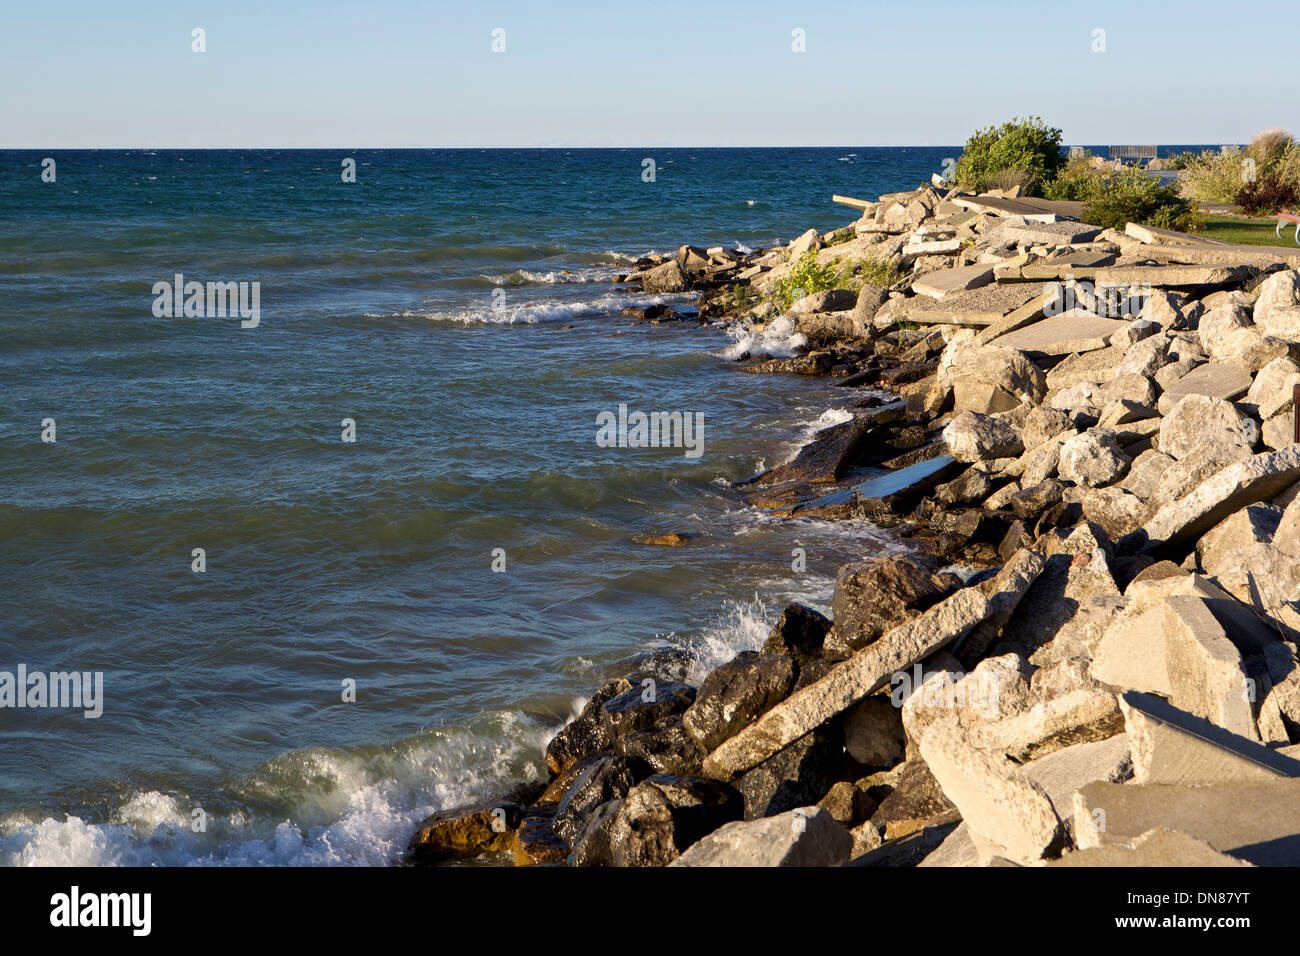 Broken slabs of concrete form a breakwall into Lake Huron at Rogers City Harbor in Michigan Stock Photo